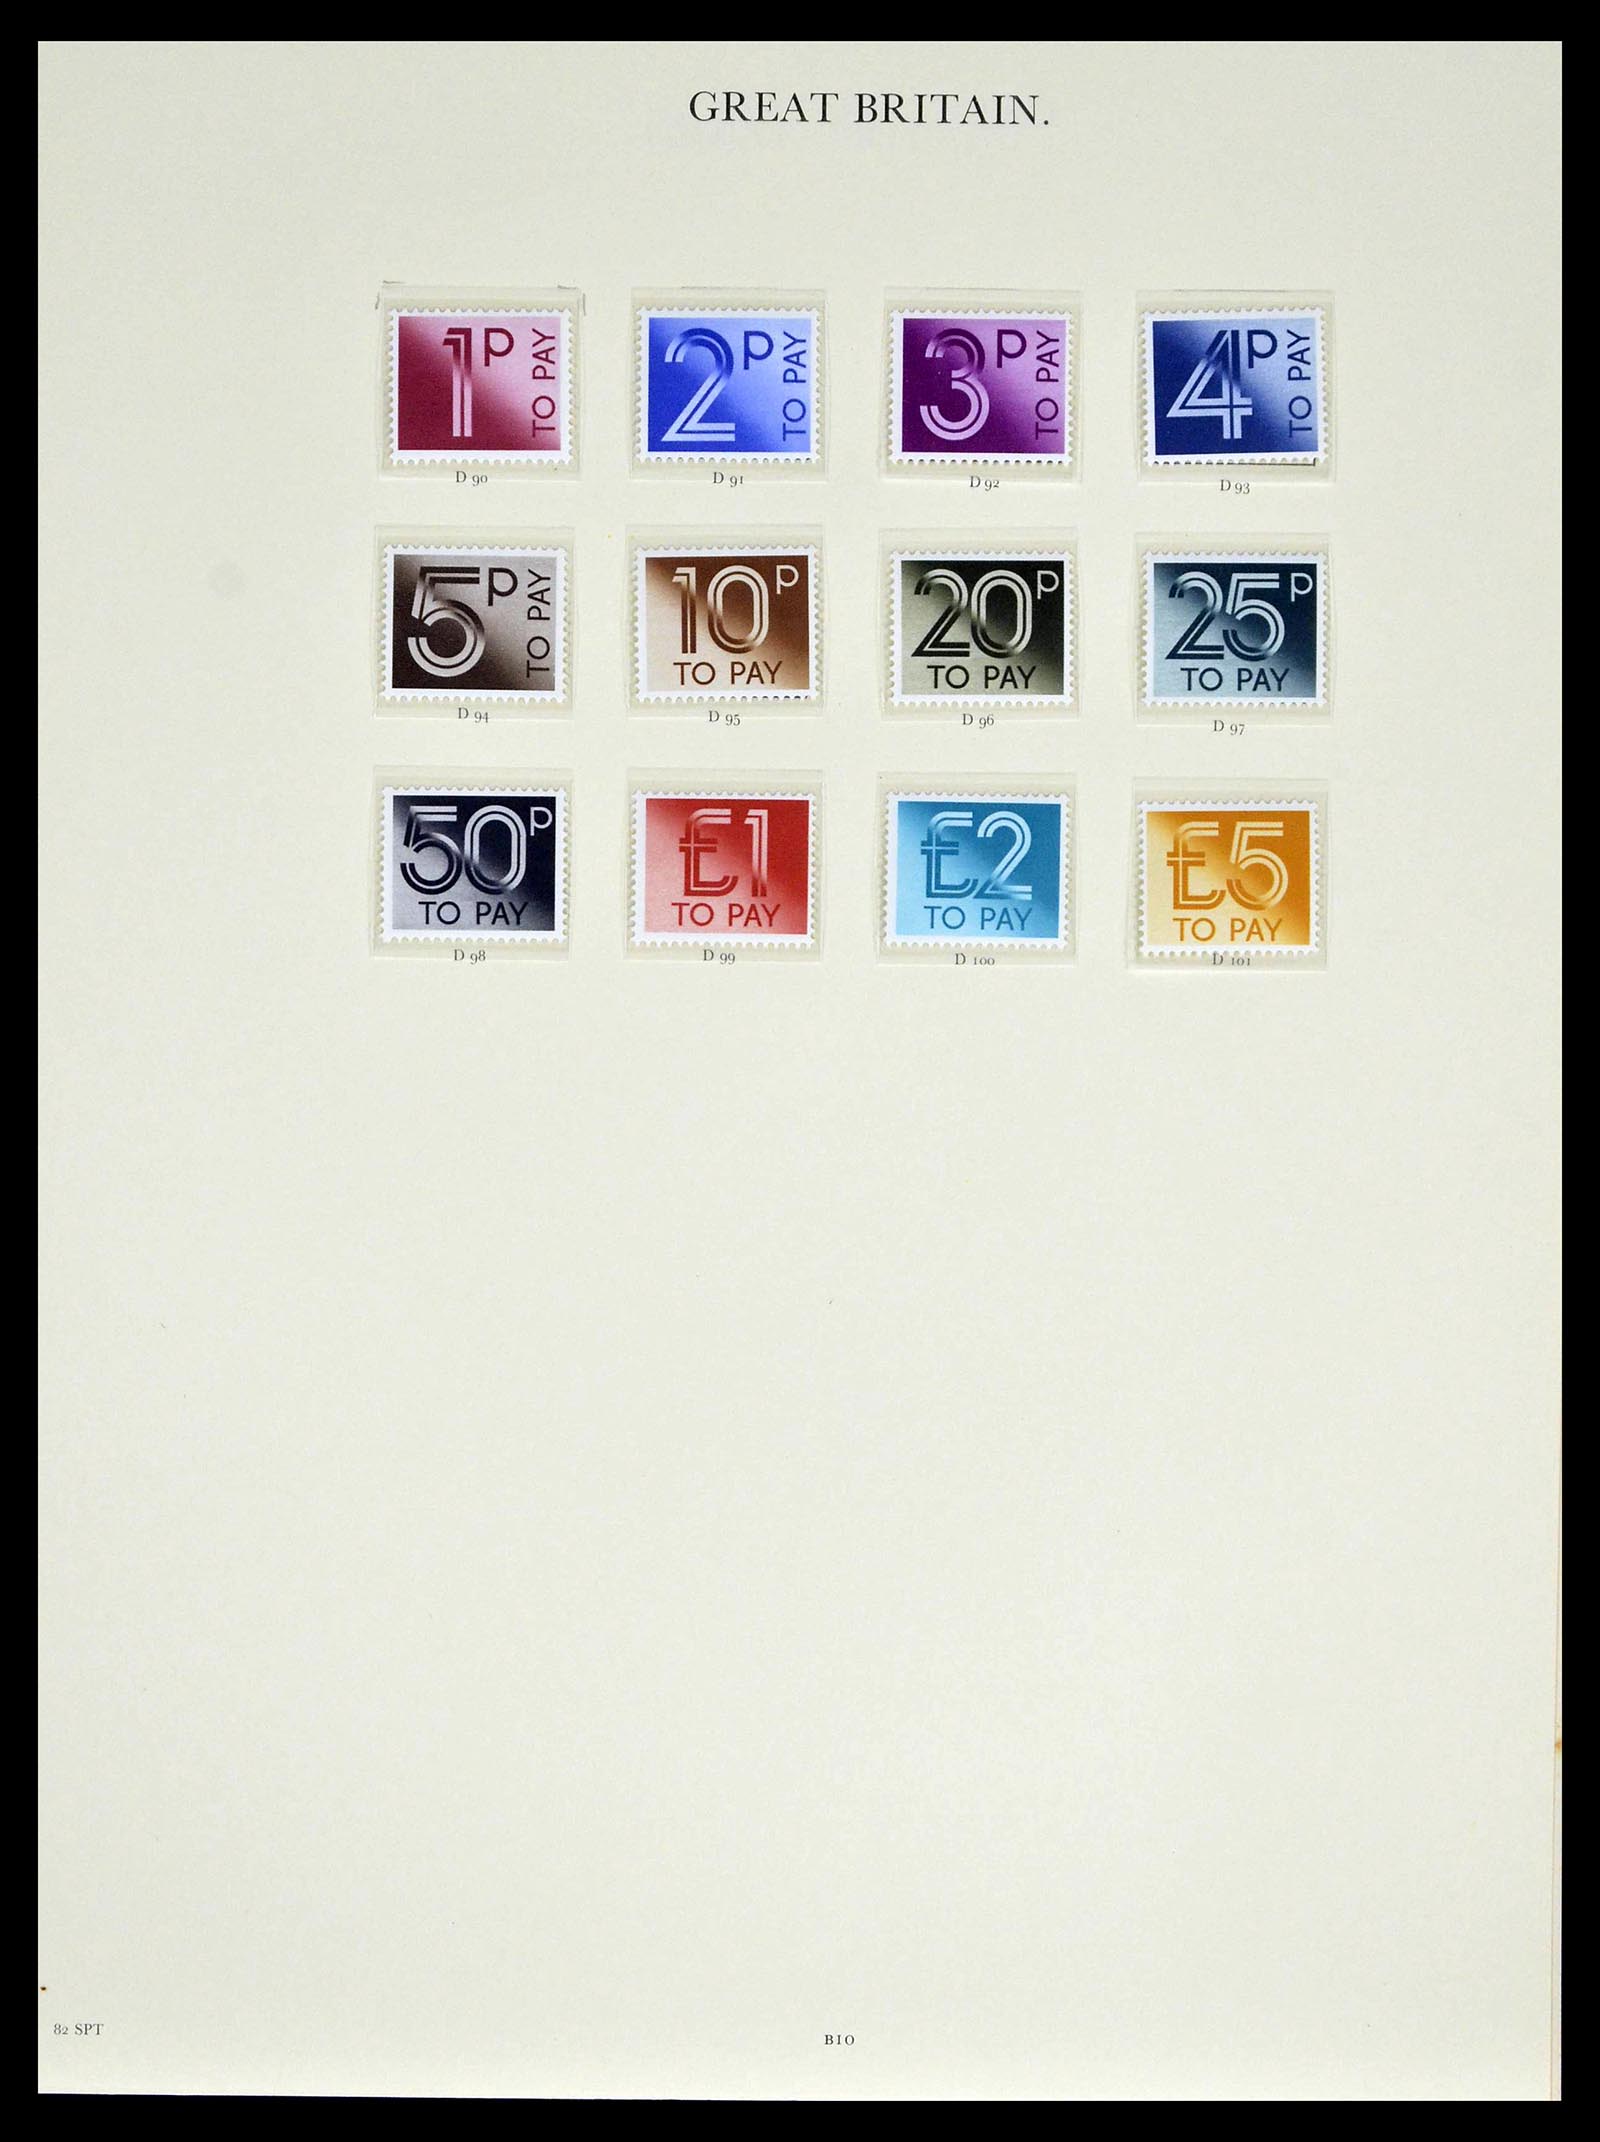 39025 0162 - Stamp collection 39025 Great Britain specialised 1840-1990.